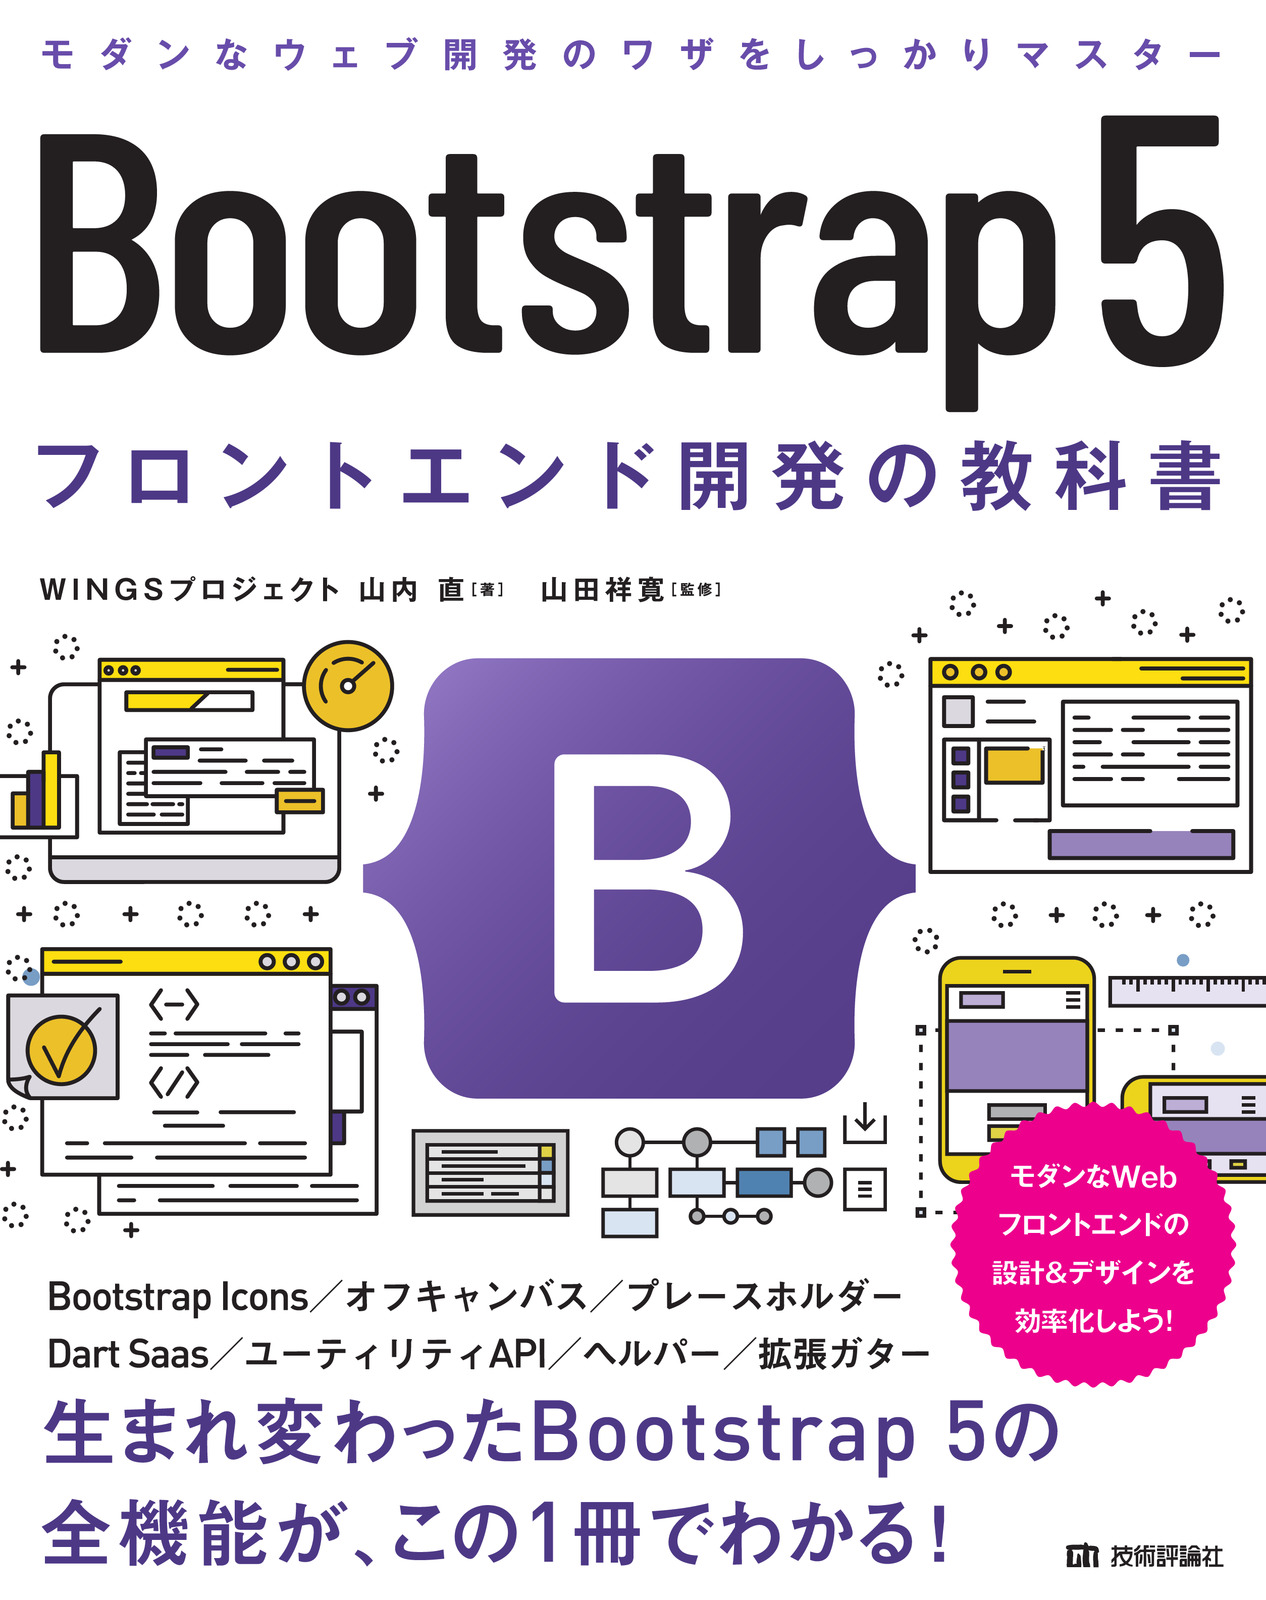 Bootstrap 5 フロントエンド開発の教科書：書籍案内｜技術評論社